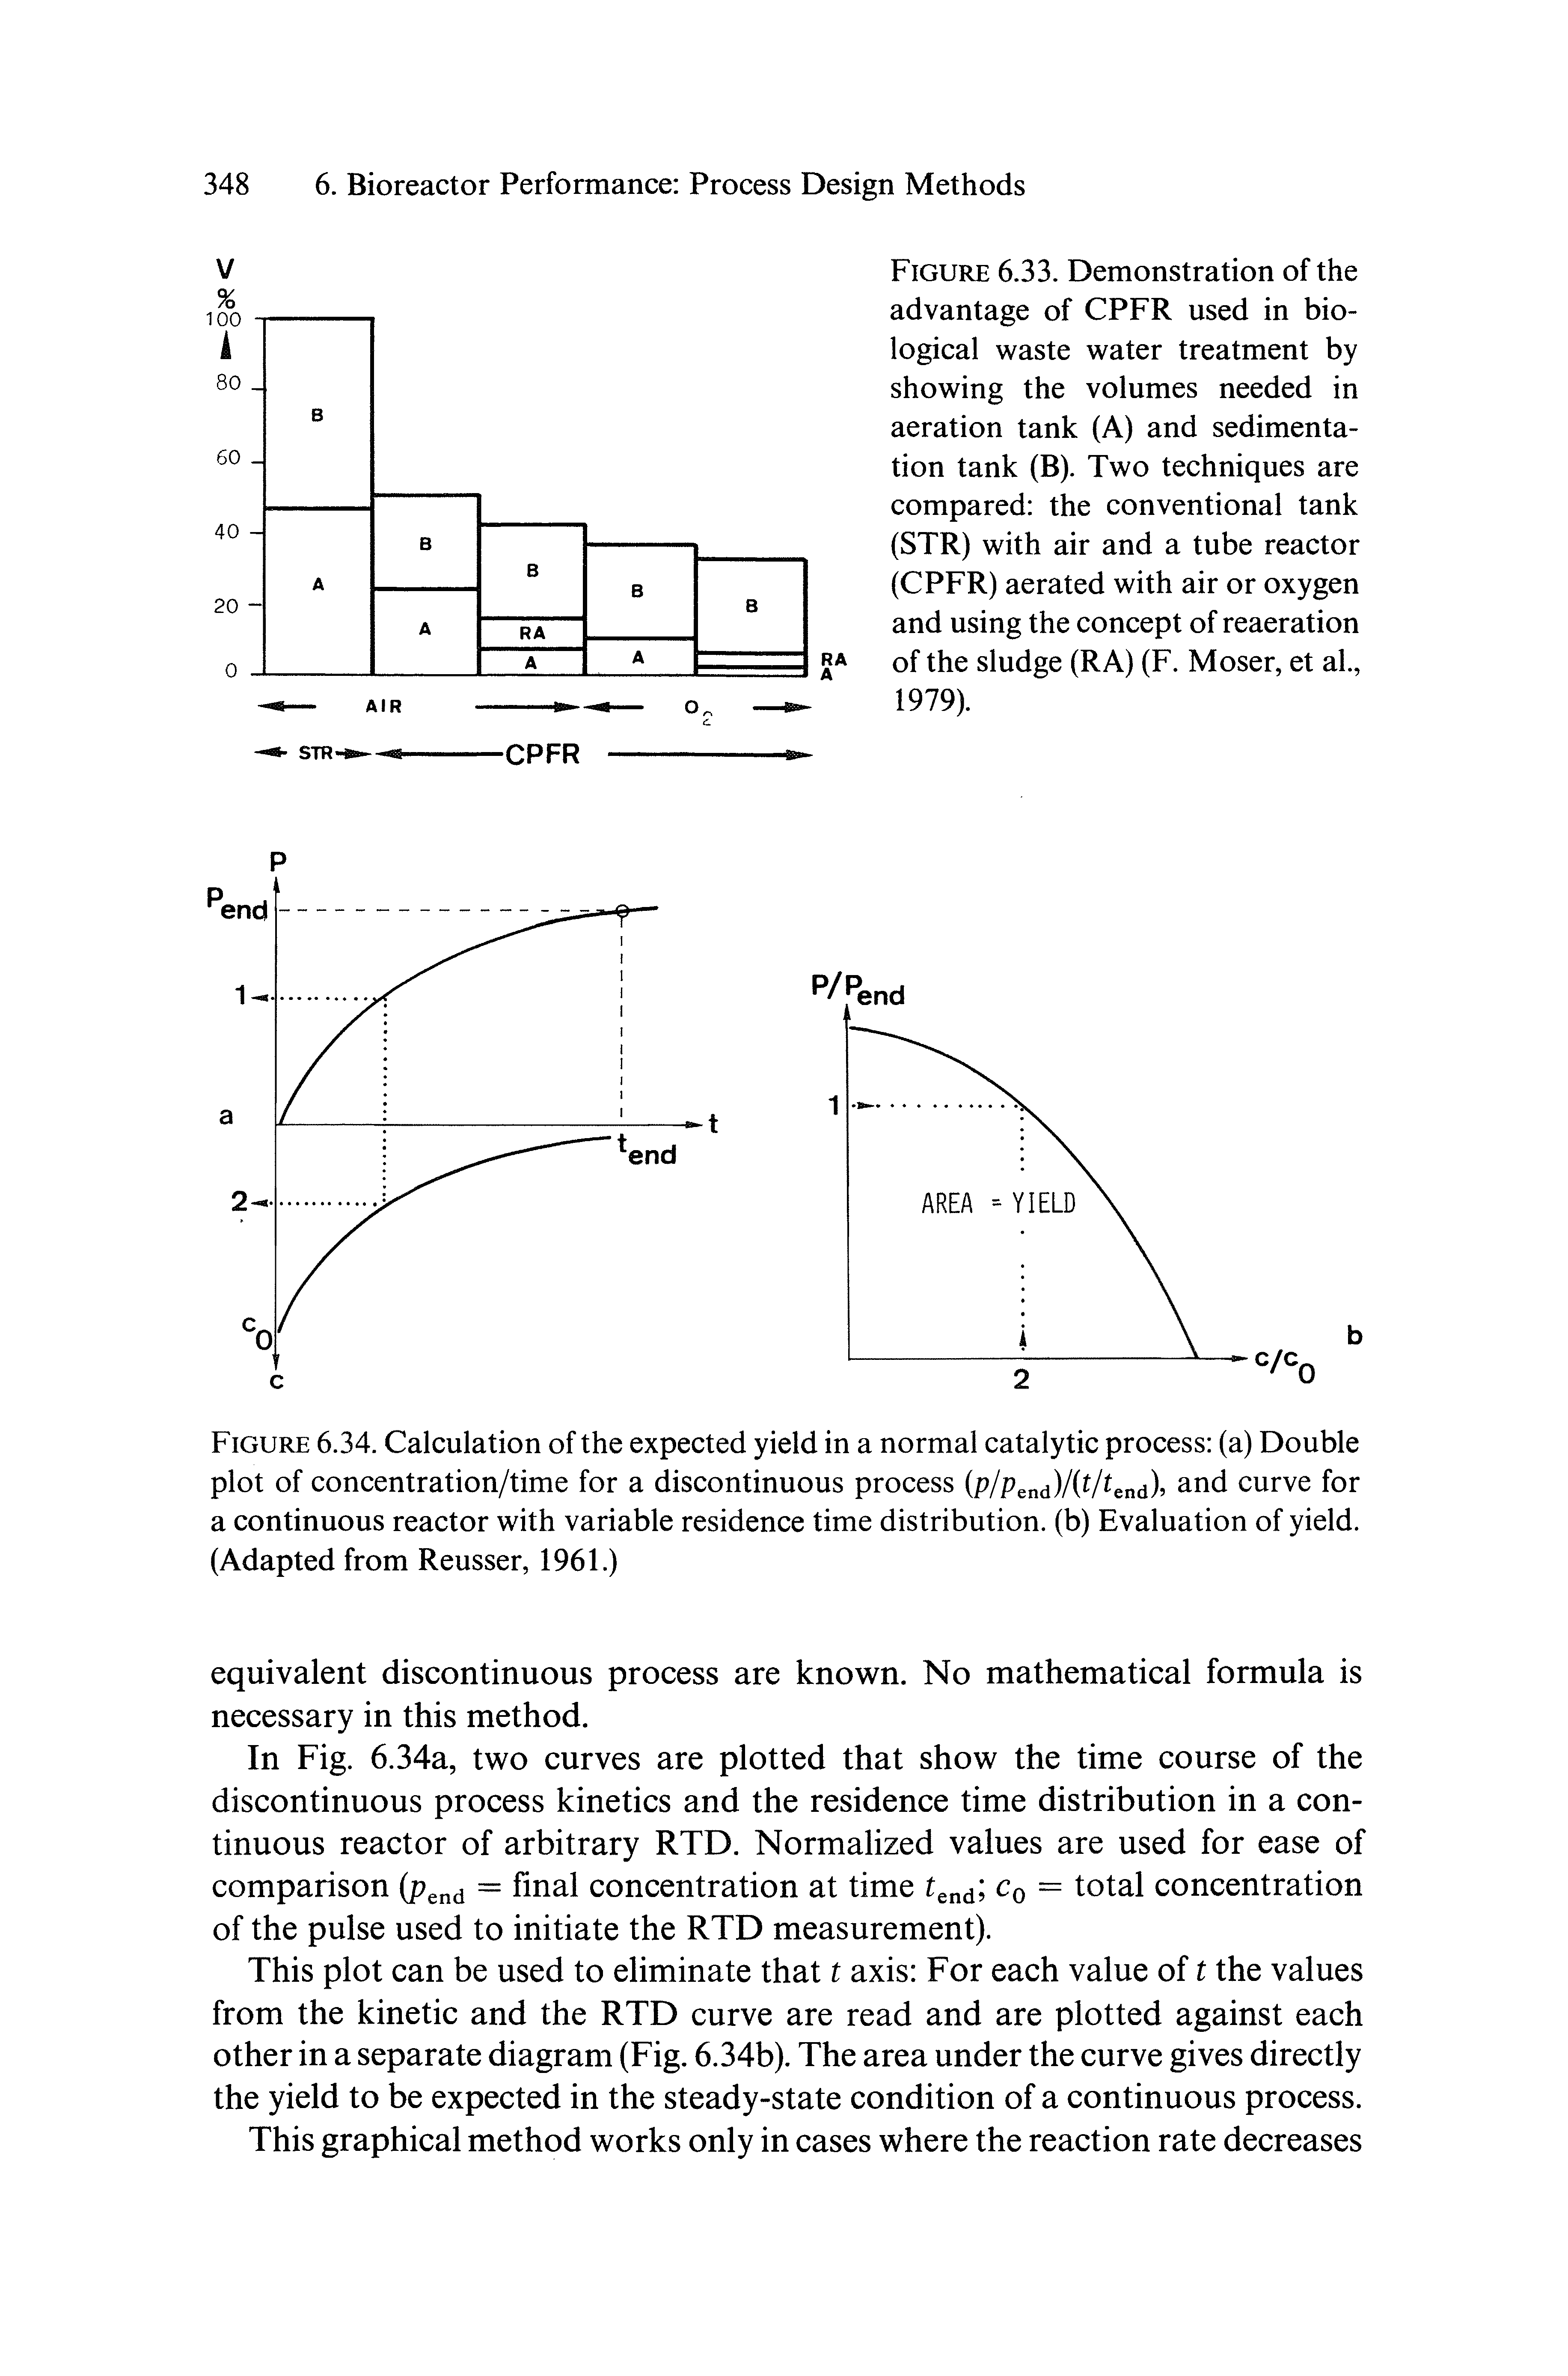 Figure 6.34. Calculation of the expected yield in a normal catalytic process (a) Double plot of concentration/time for a discontinuous process (p/Pend)/( AendX and curve for a continuous reactor with variable residence time distribution, (b) Evaluation of yield. (Adapted from Reusser, 1961.)...